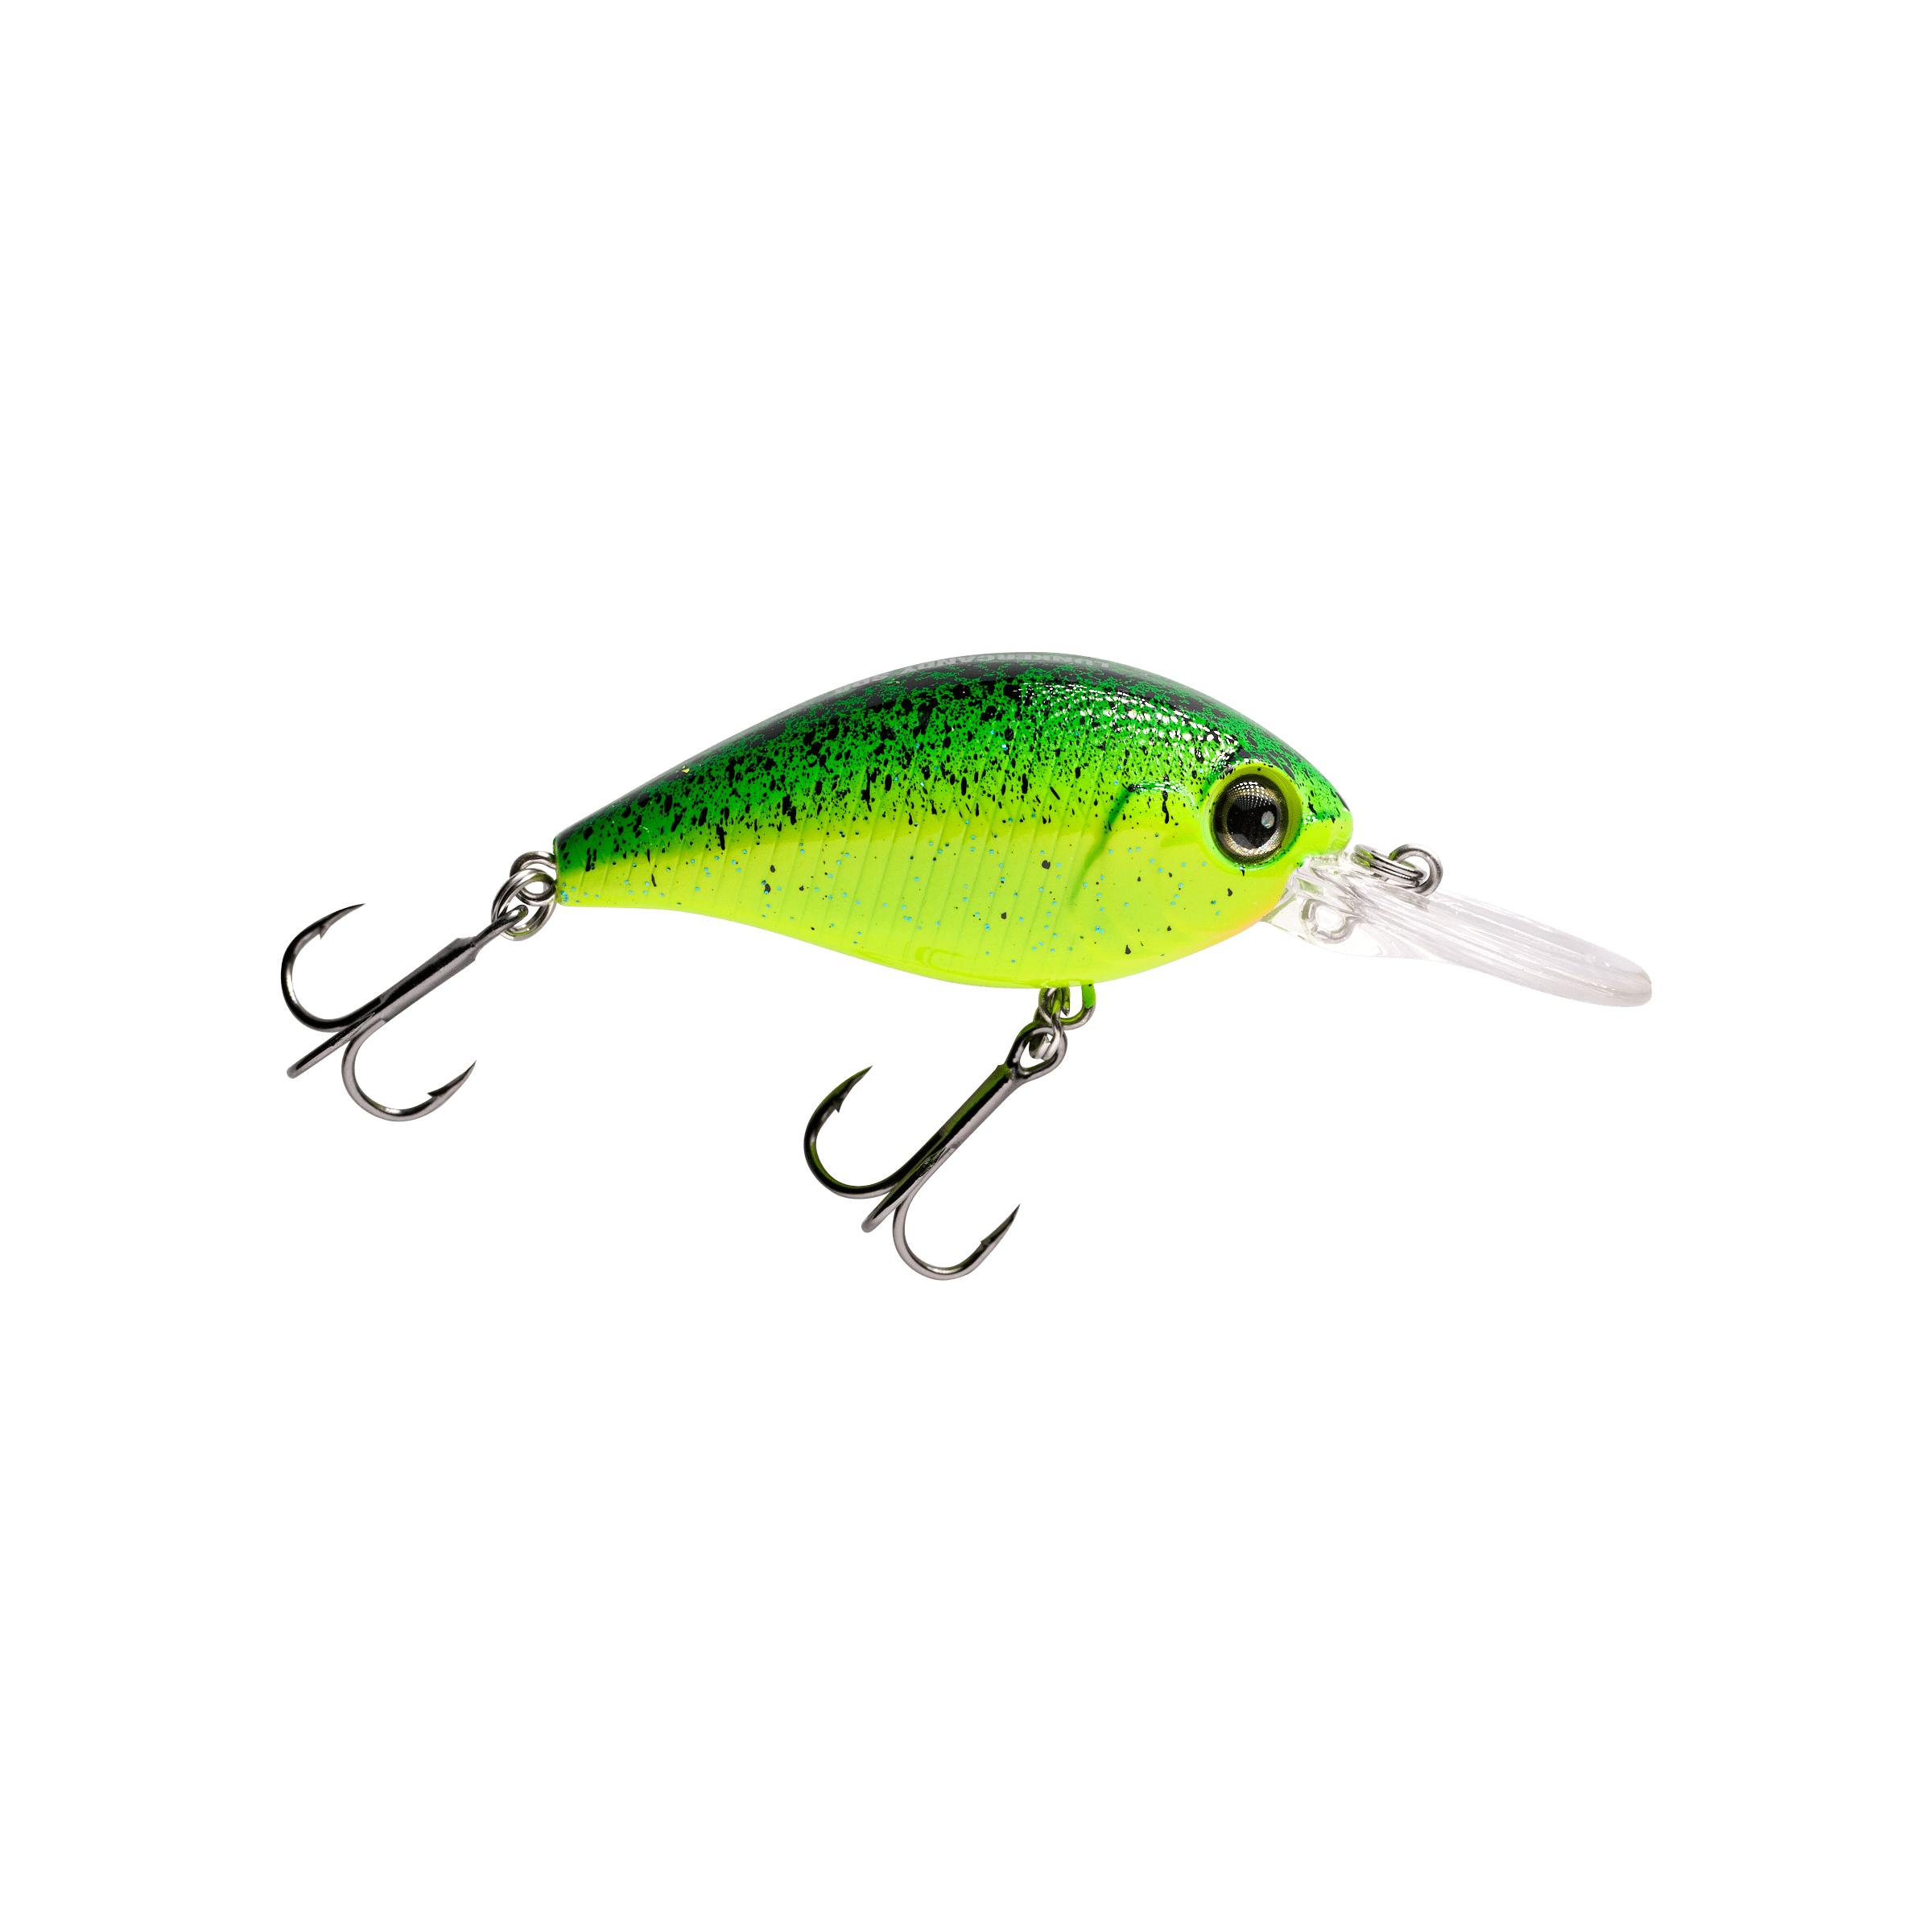 THE PRODUCERS GHOST (Clear/Black) Topwater Lure (New) (TZ) $9.99